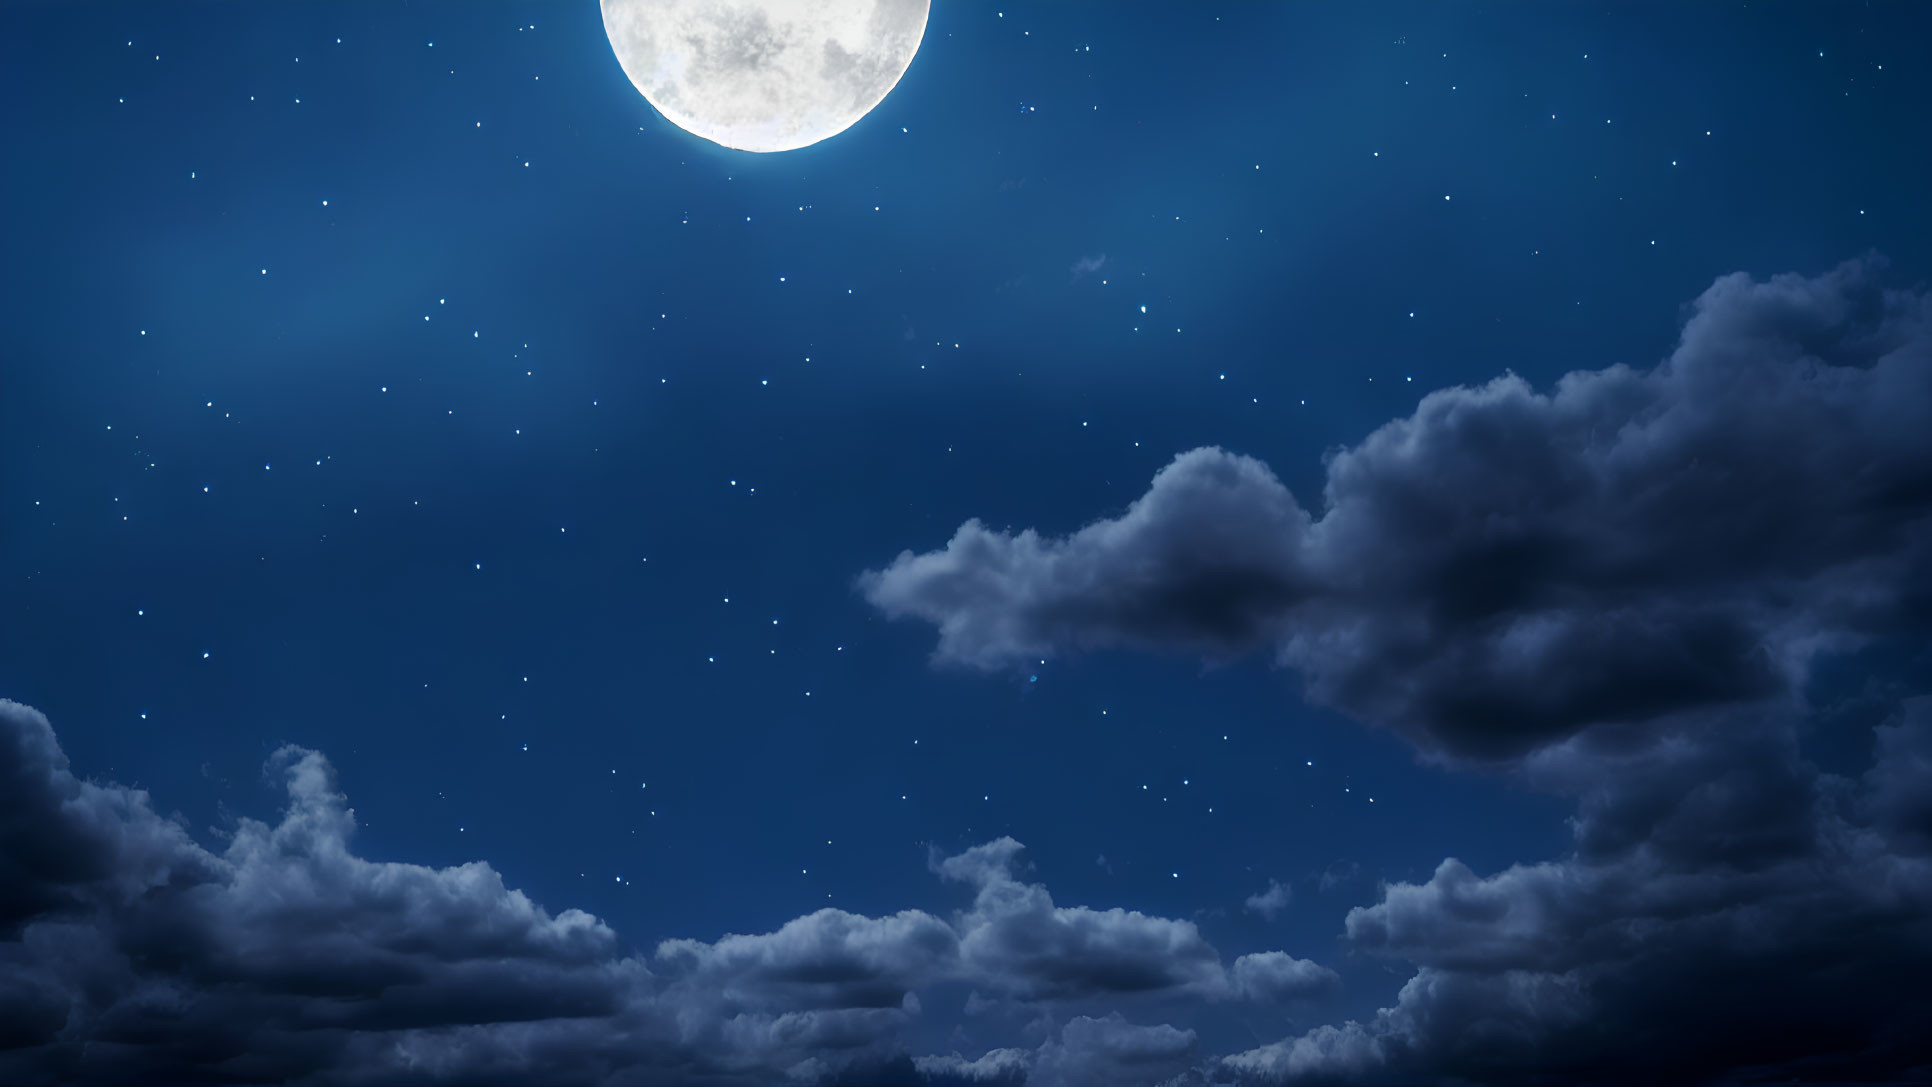 Night Sky with Full Moon and Stars Peeking Through Clouds